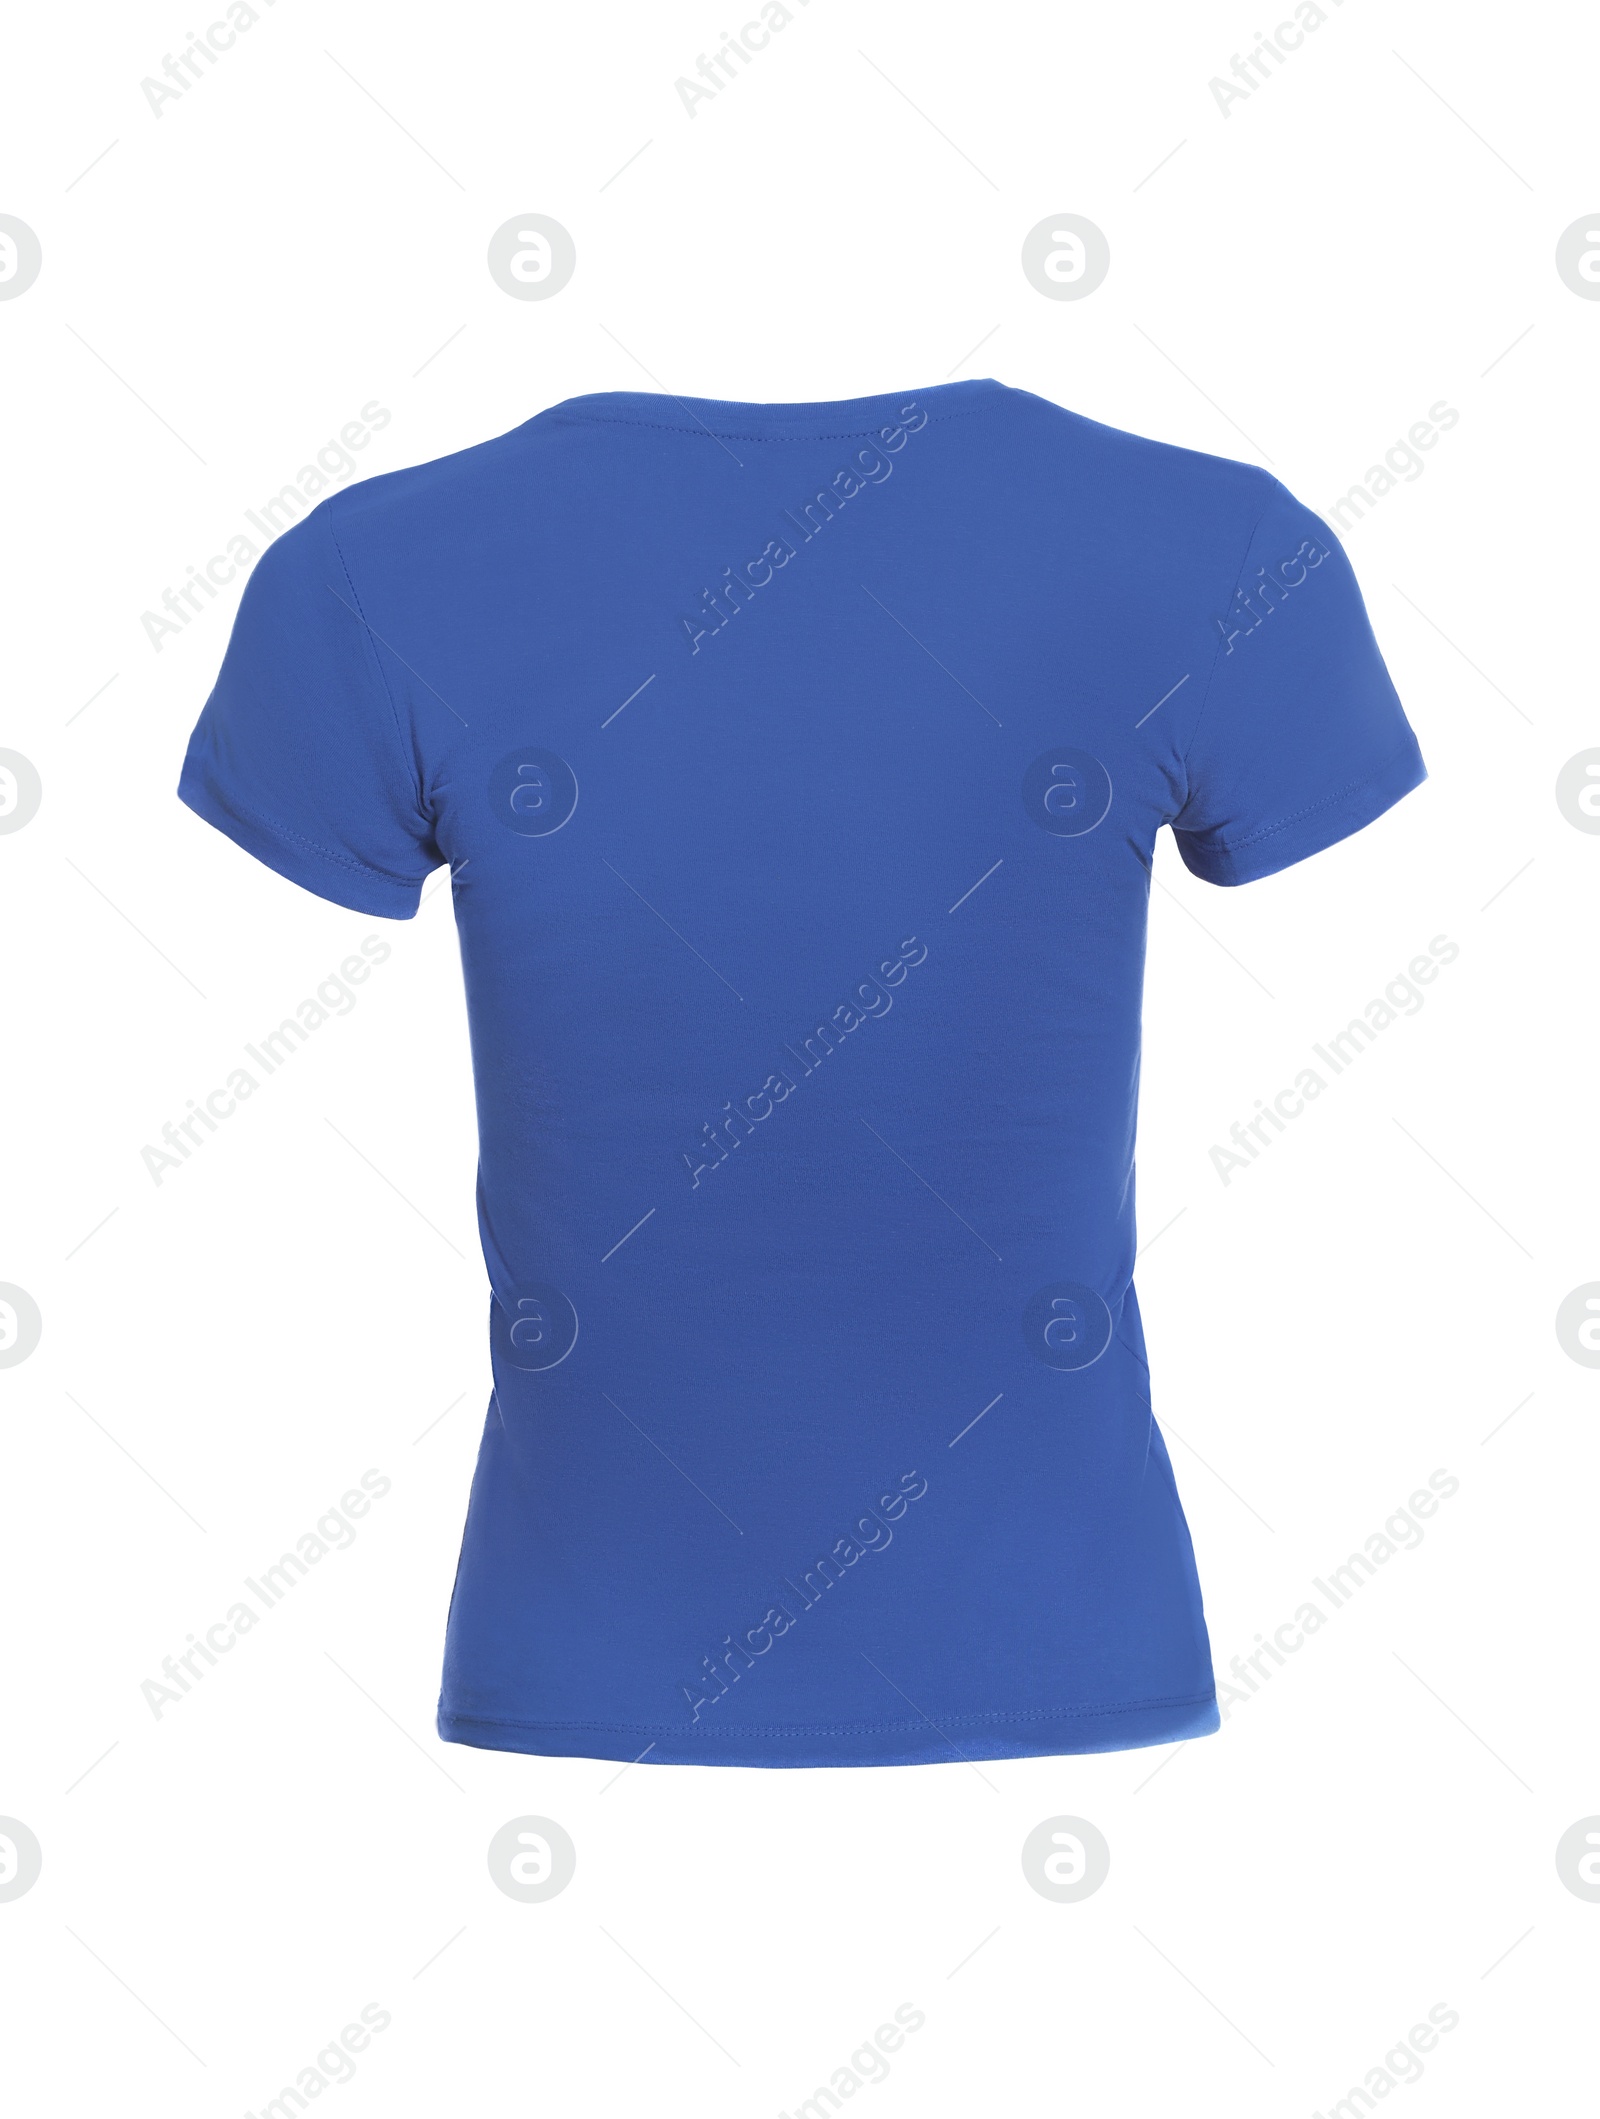 Photo of Mannequin with blue women's t-shirt isolated on white. Mockup for design